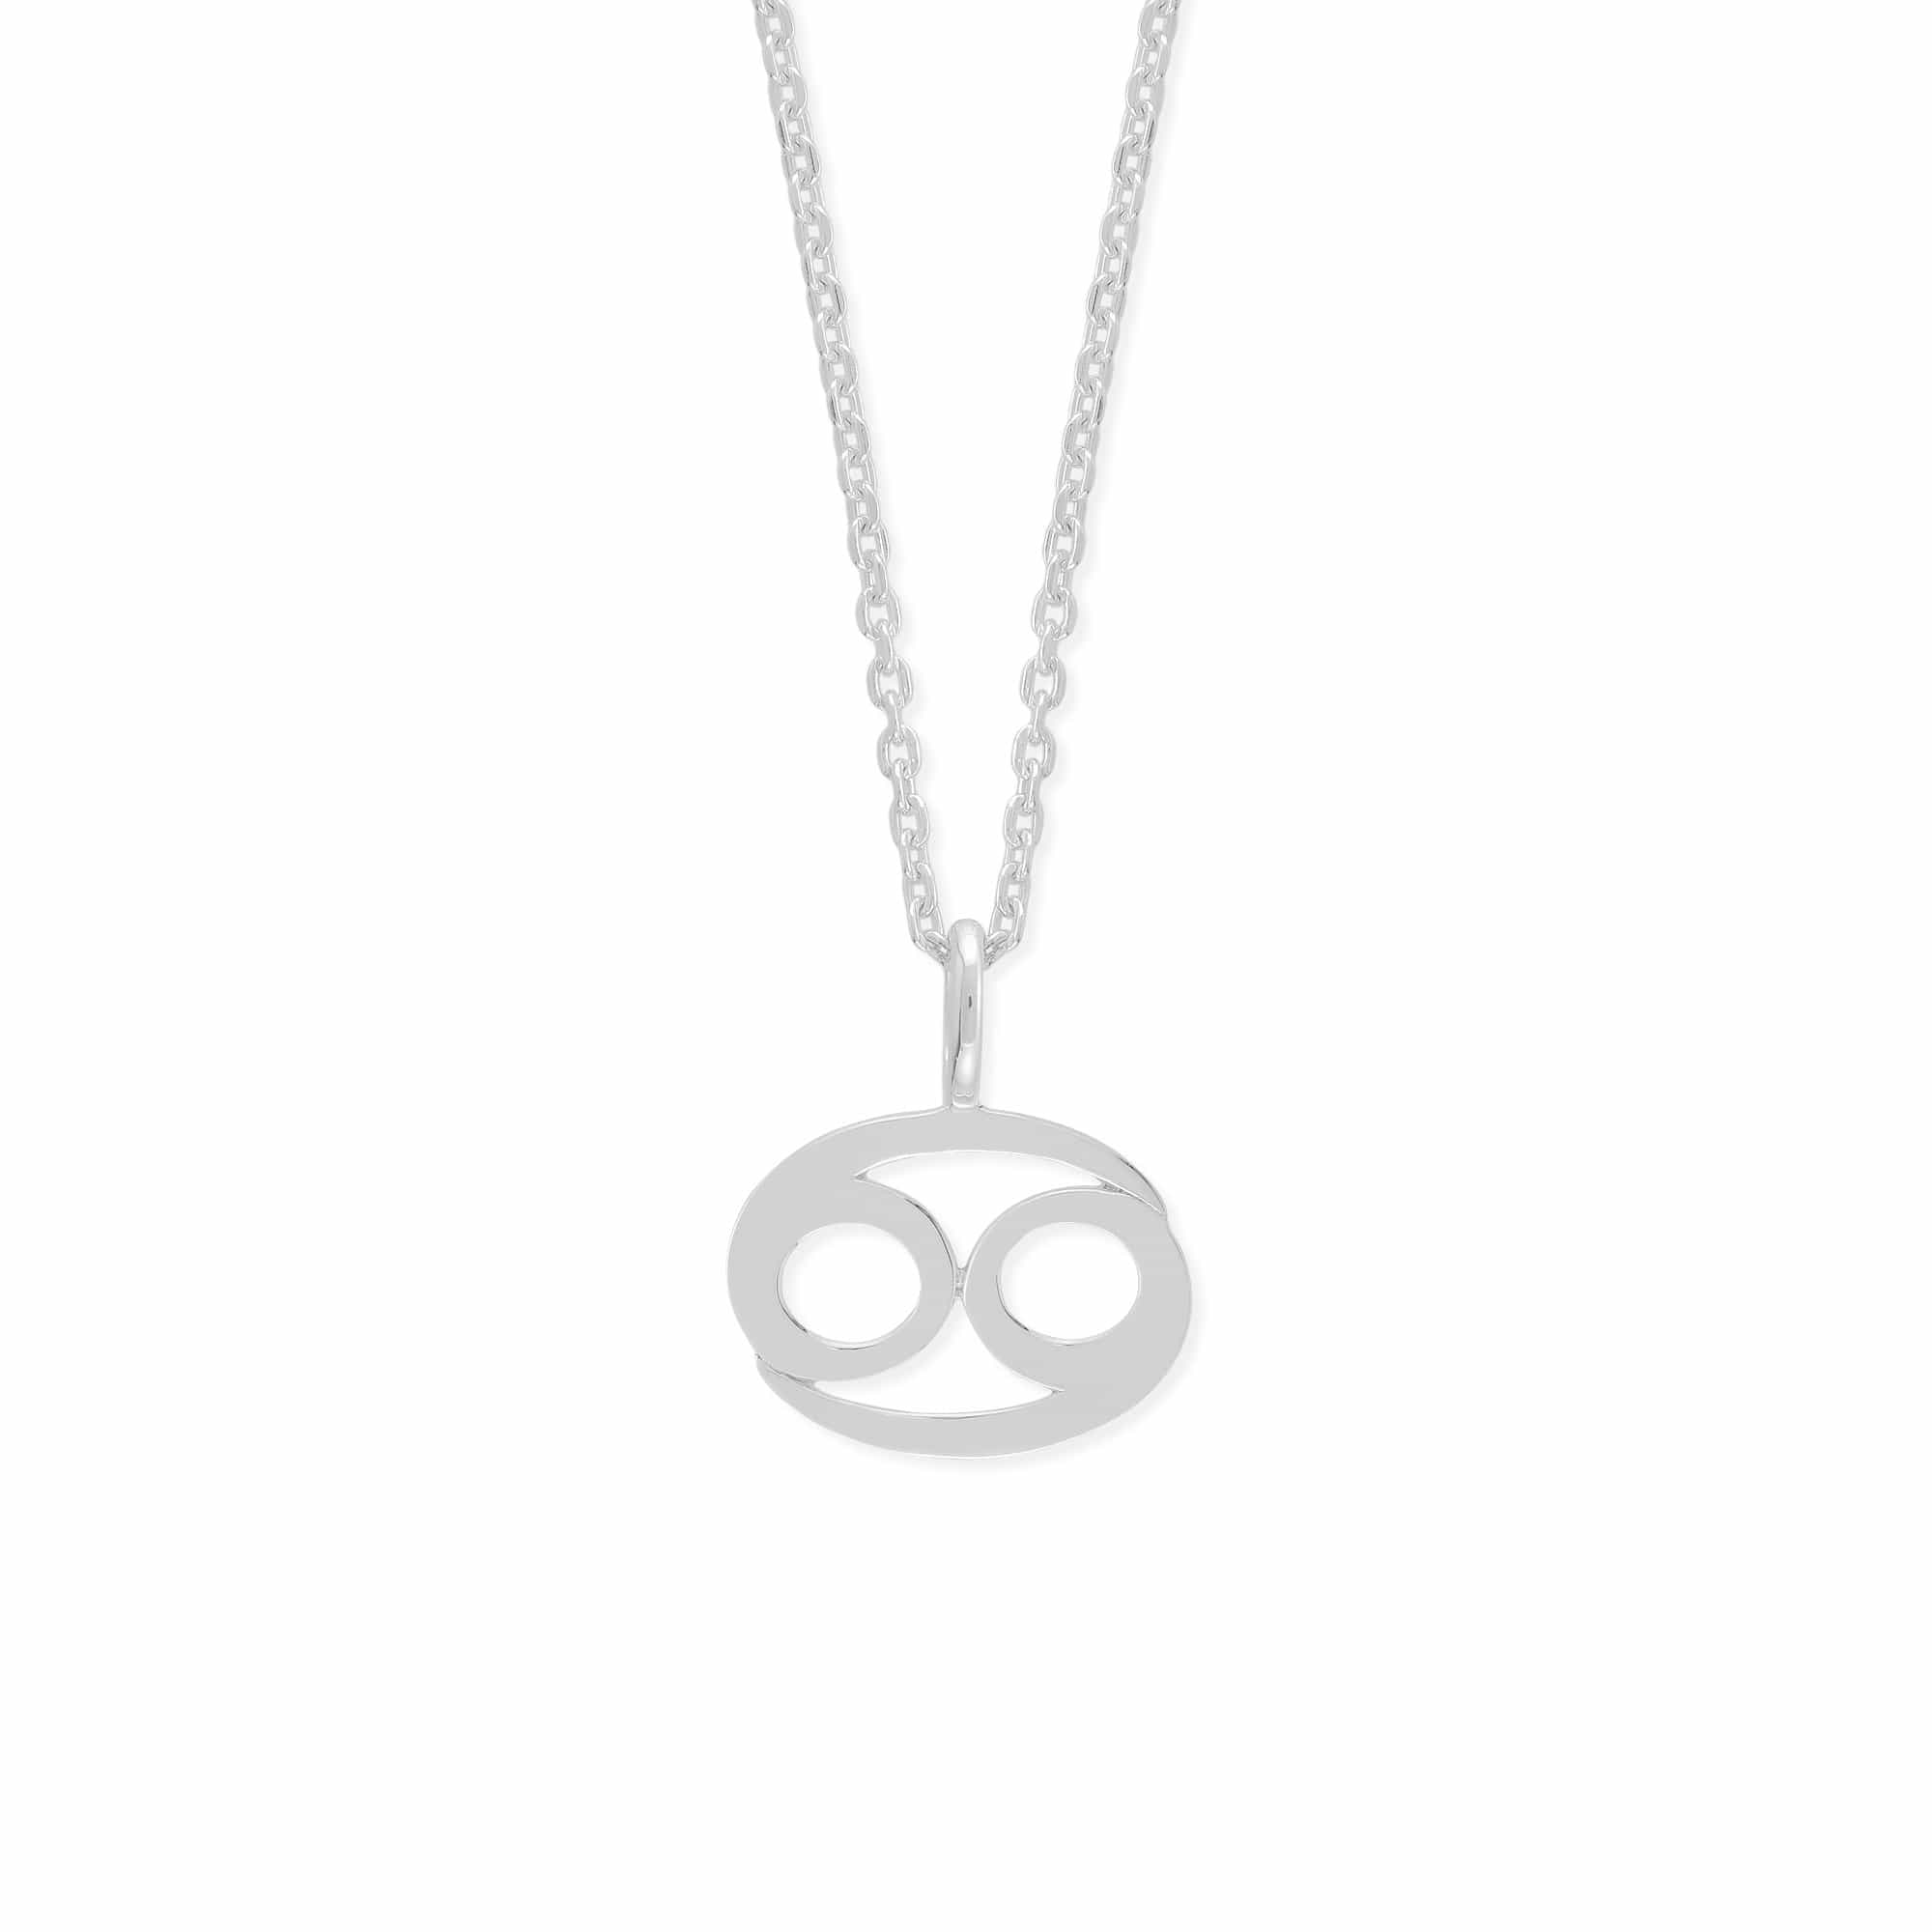 Boma Jewelry Necklaces Sterling Silver / Cancer Zodiac Necklace